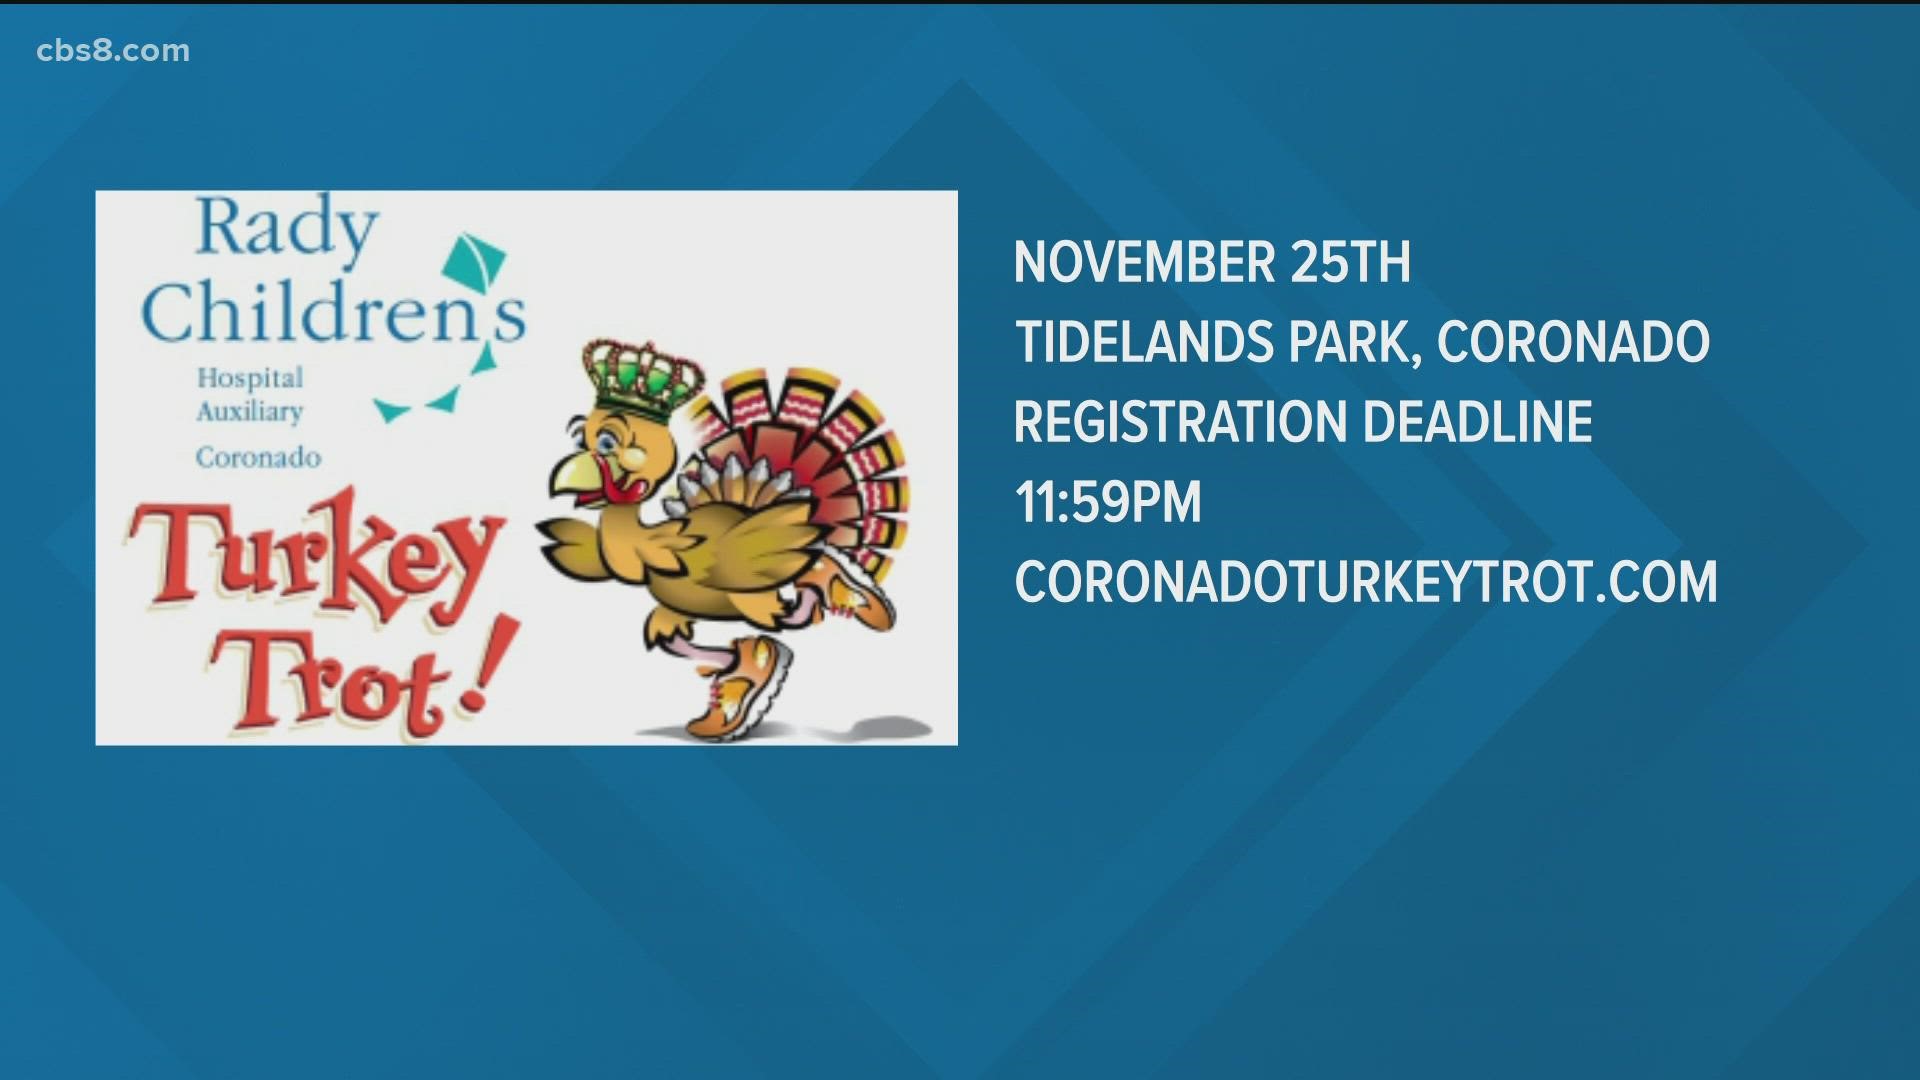 For the 8th year, the Coronado 5K Turkey Trot will raise money for Rady Children's Hospital on Thanksgiving. More info on the FOUR and at CoronadoTurkeyTrot.com